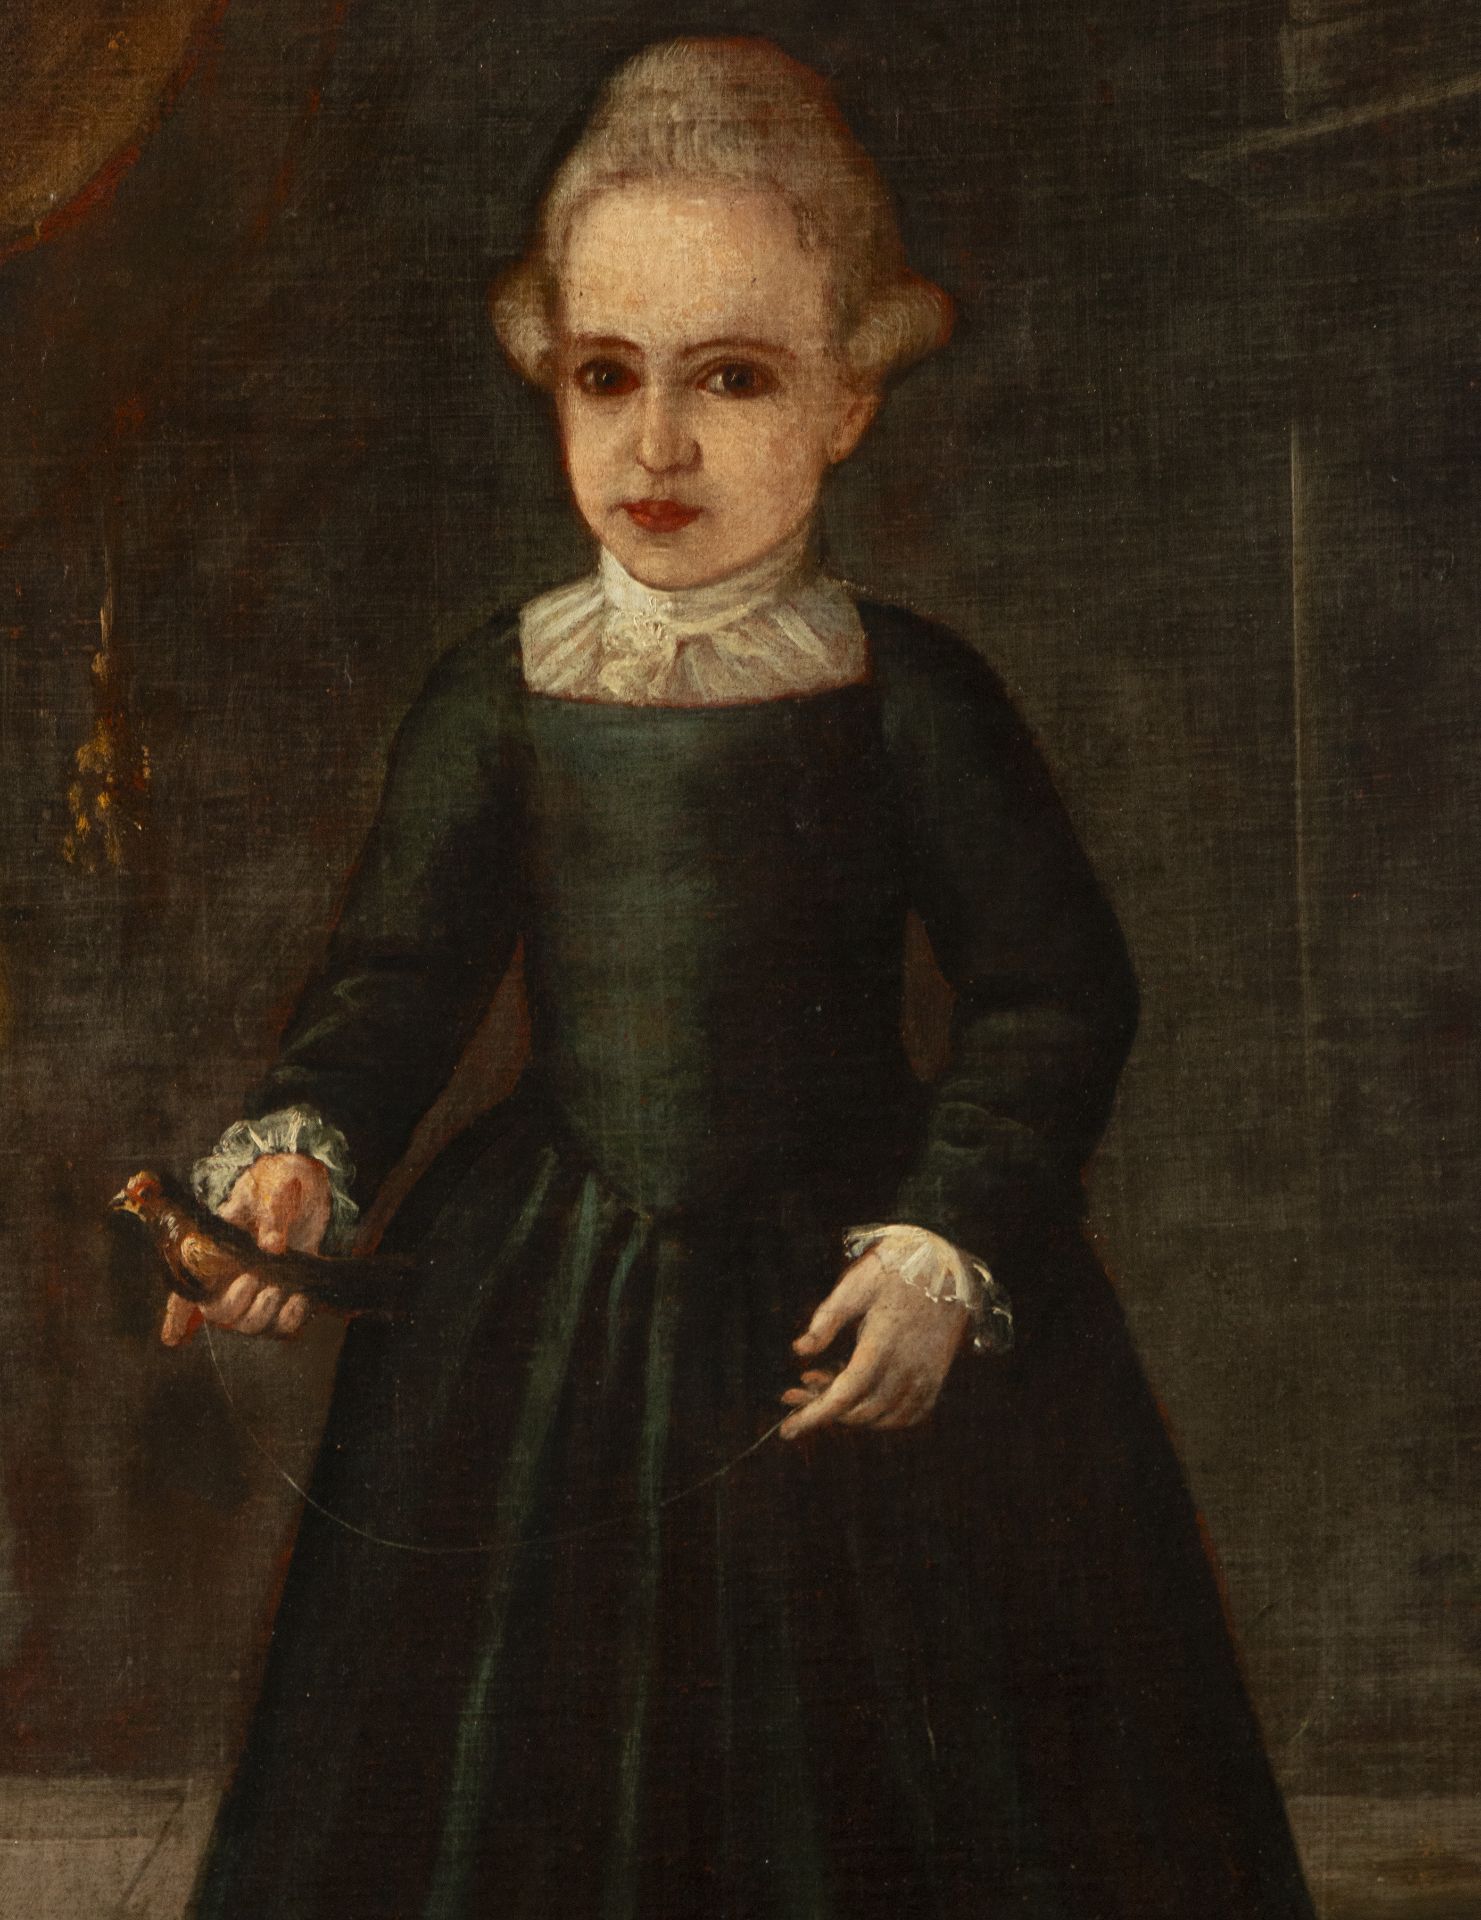 Portrait of a Girl, late 17th century - Image 2 of 5